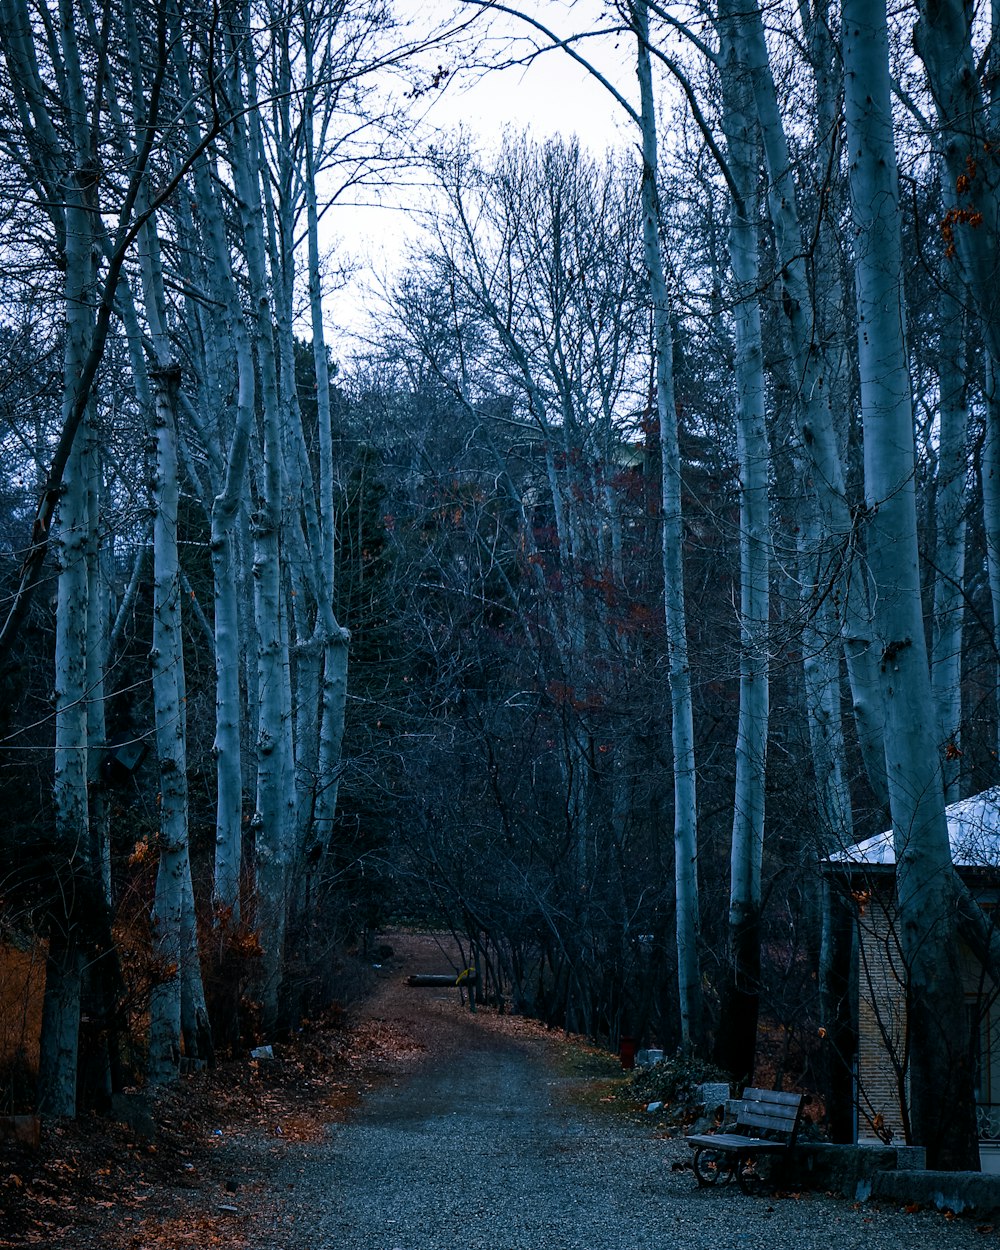 a dirt road surrounded by trees and a bench